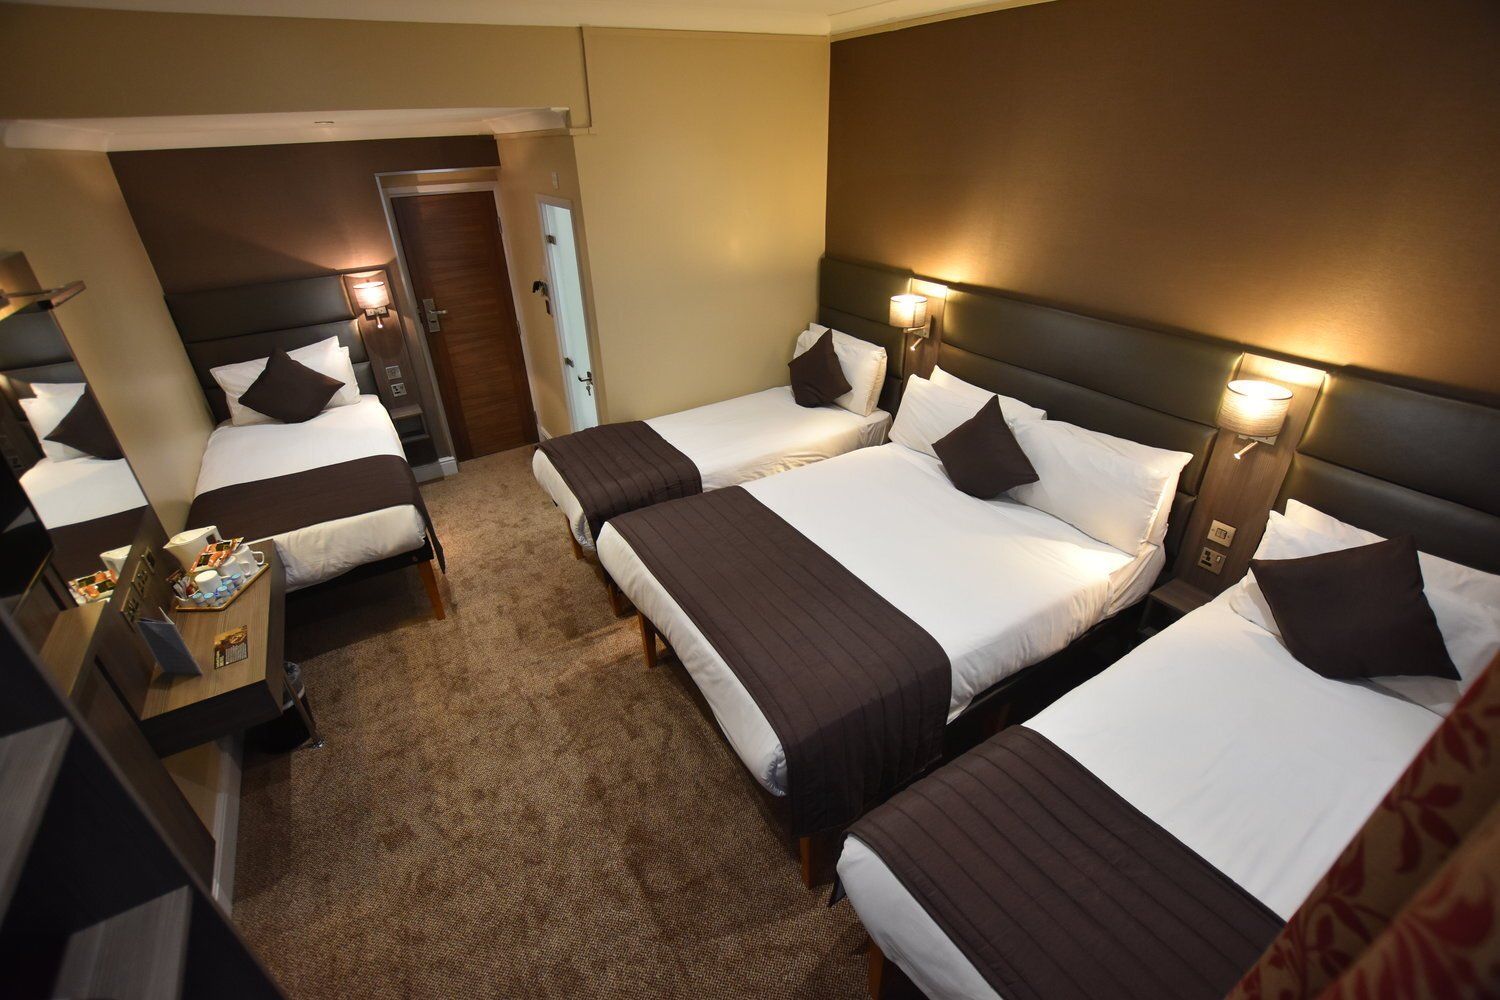 Quintuple room at The Brunel Hotel in London